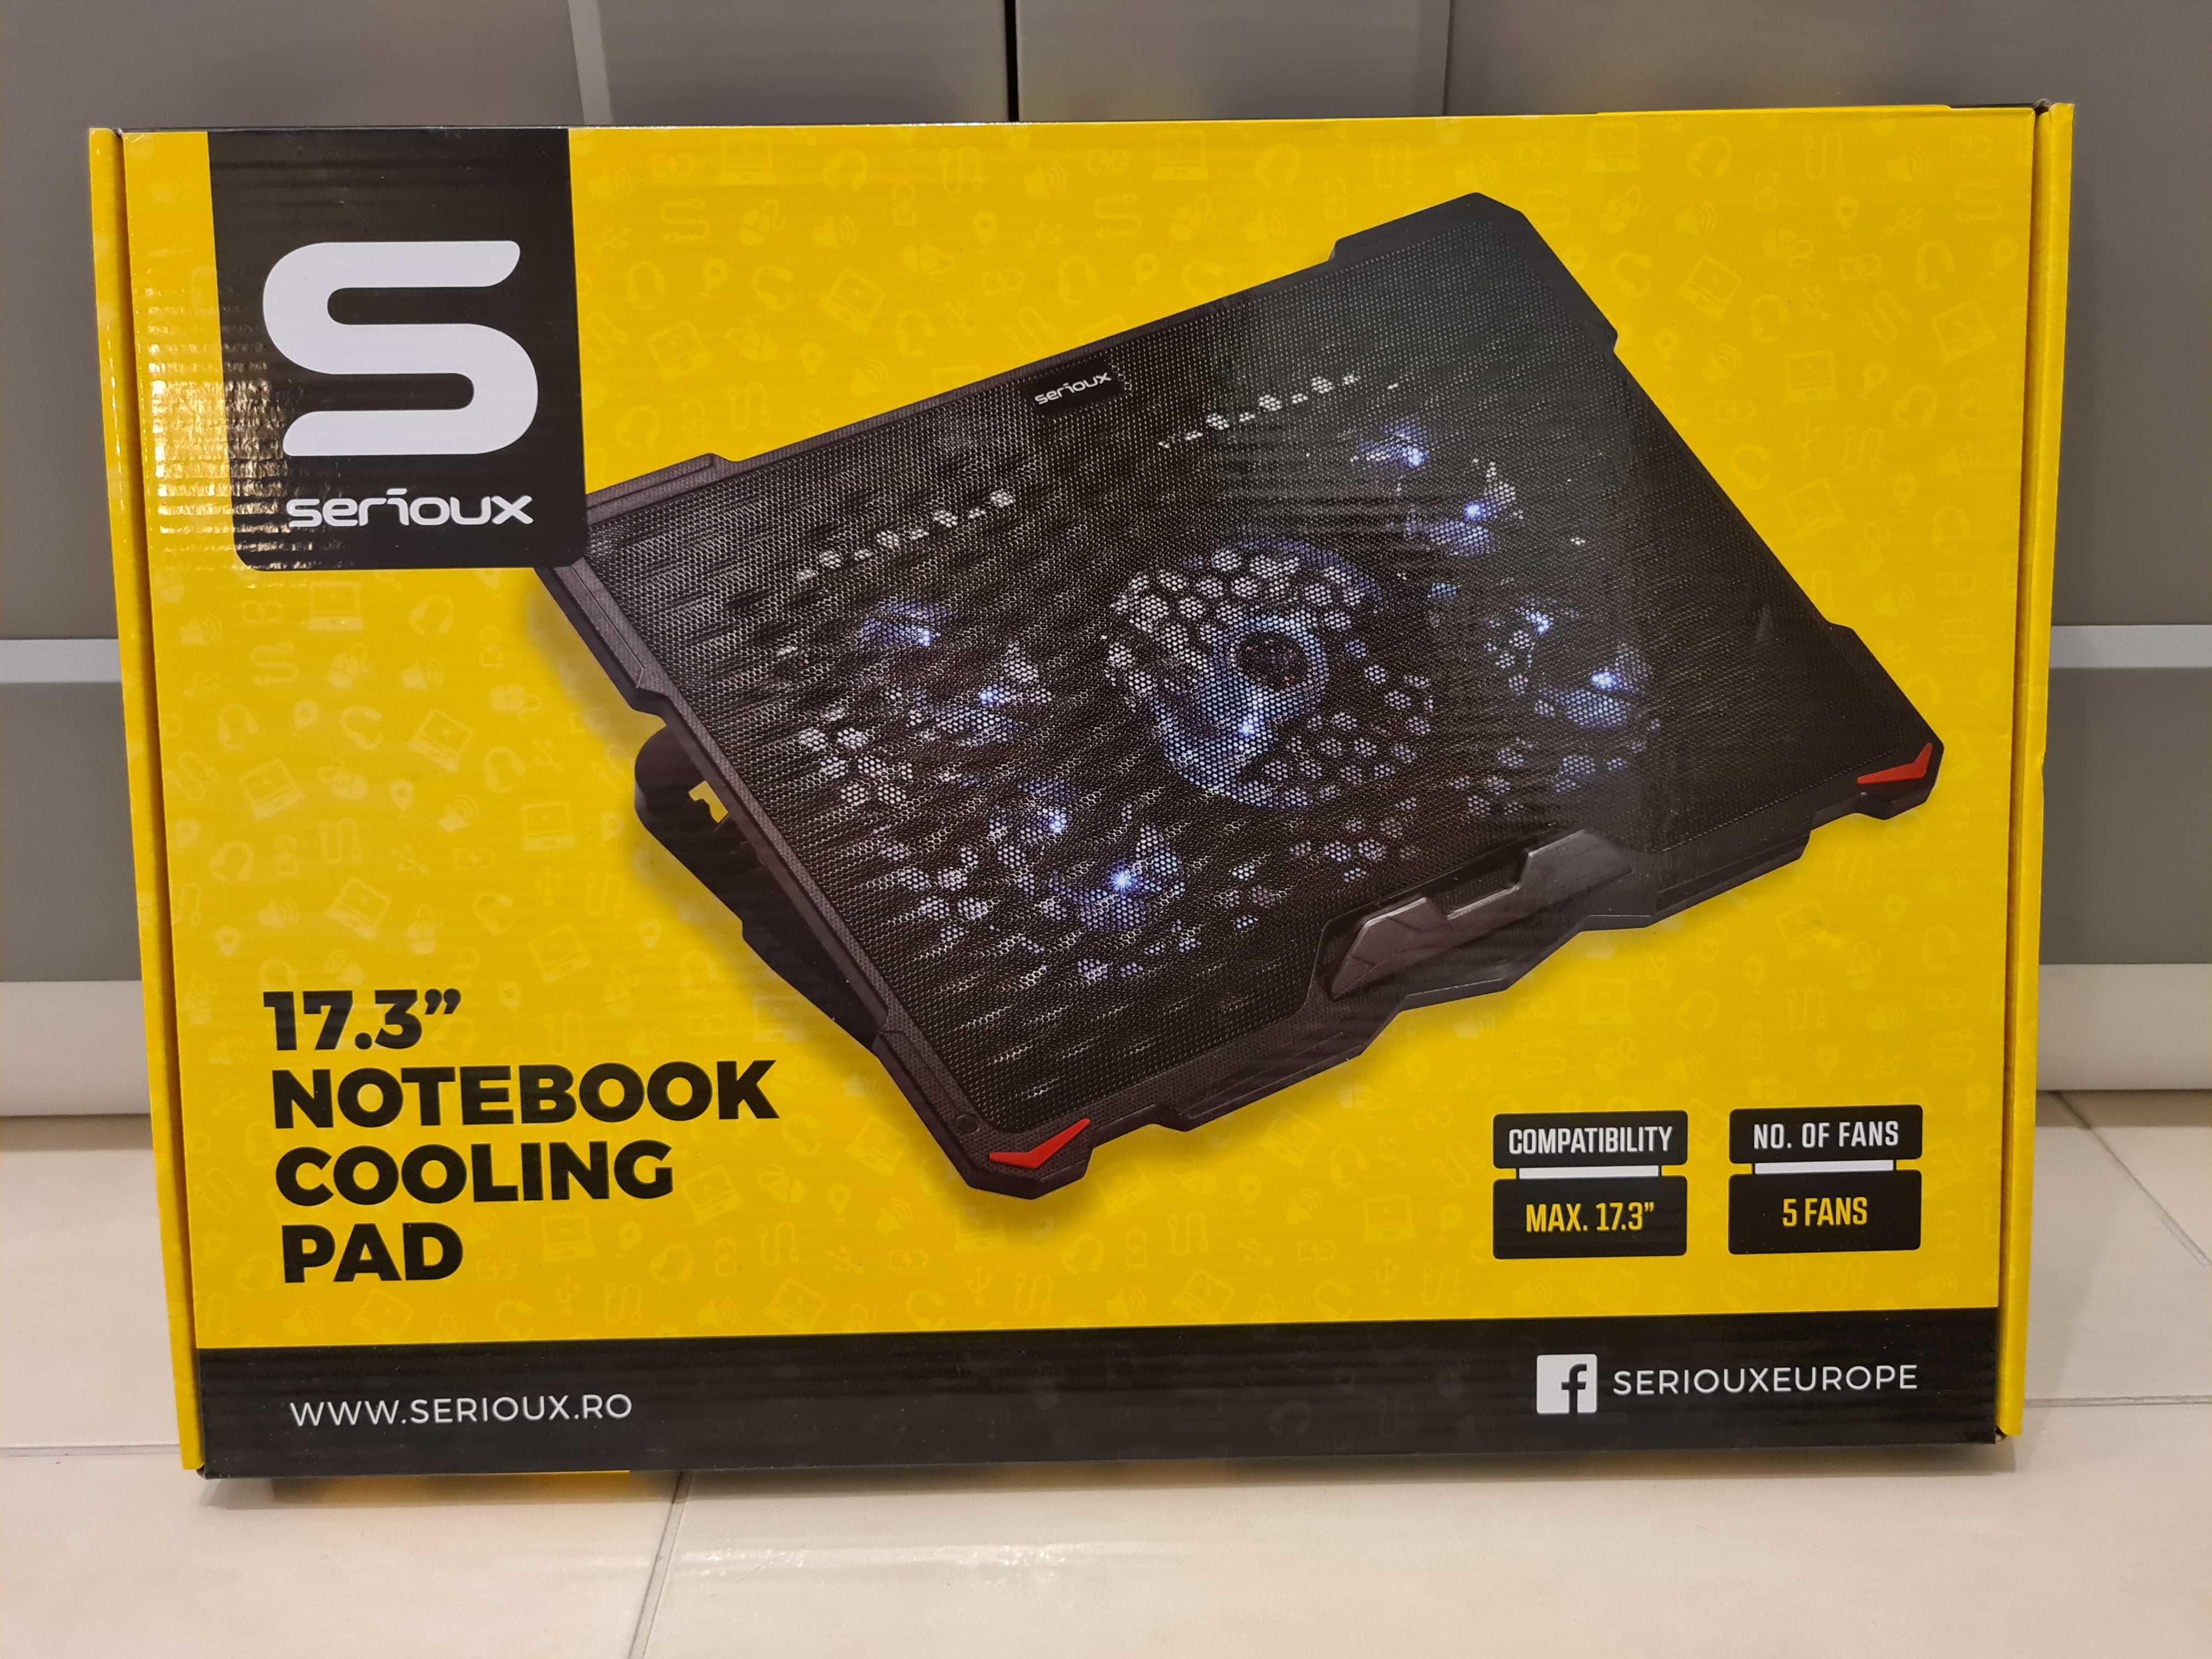 Noteboock cooling pad 17.3" Serioux